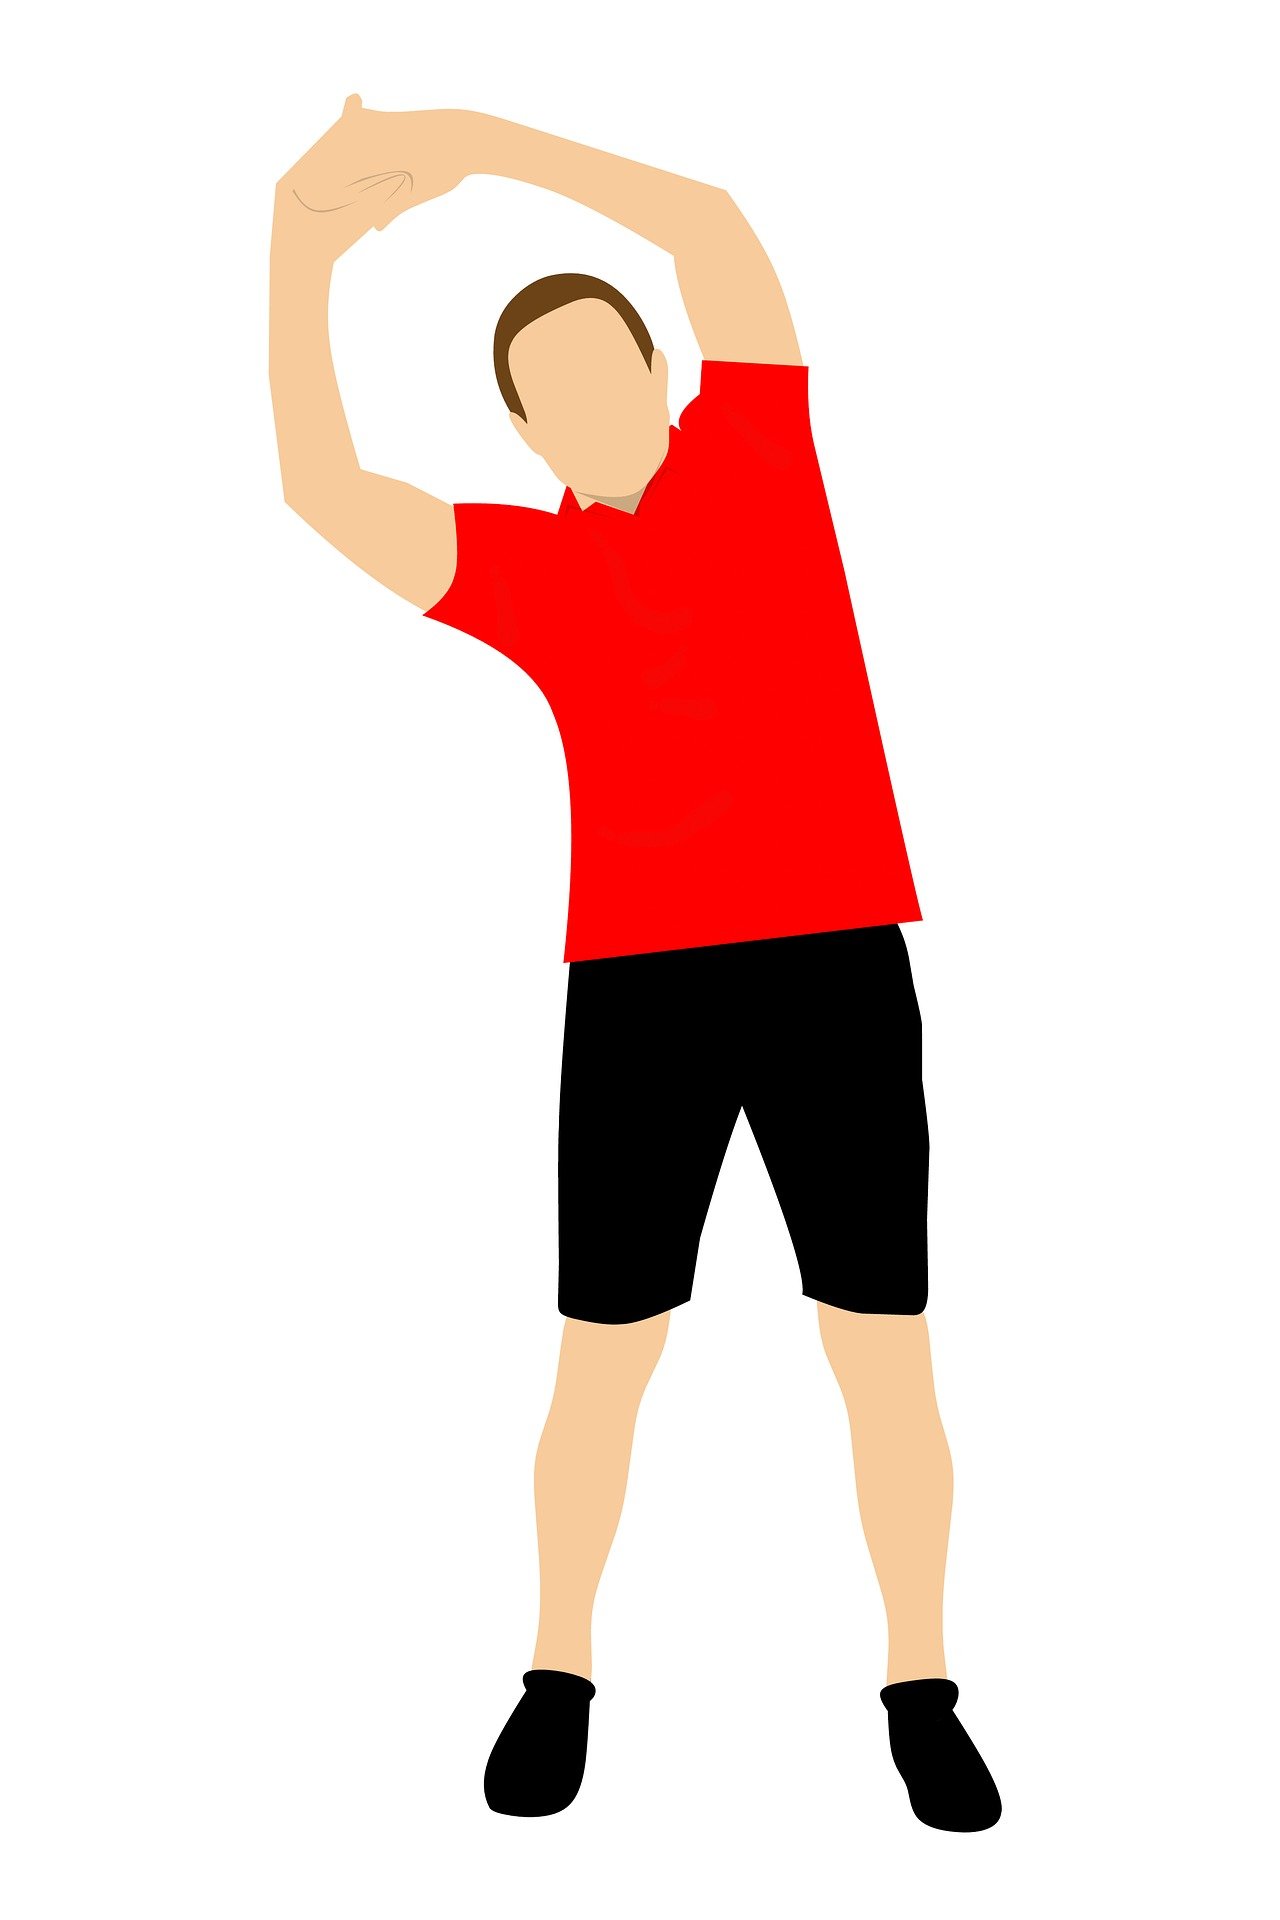 Man in red shirt stretching (illustration).